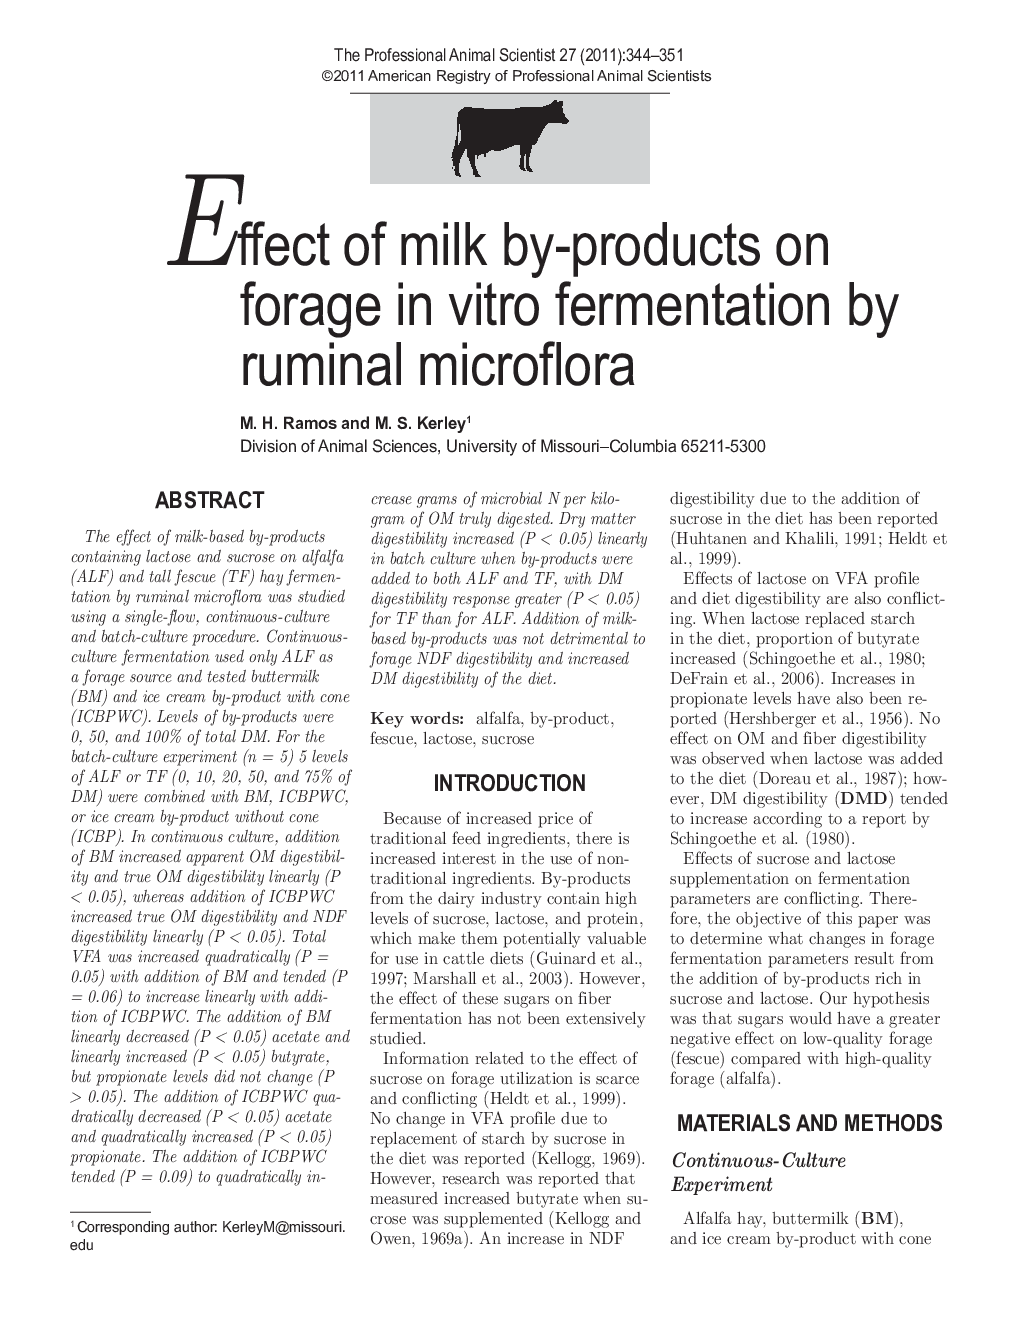 Effect of milk by-products on forage in vitro fermentation by ruminal microflora